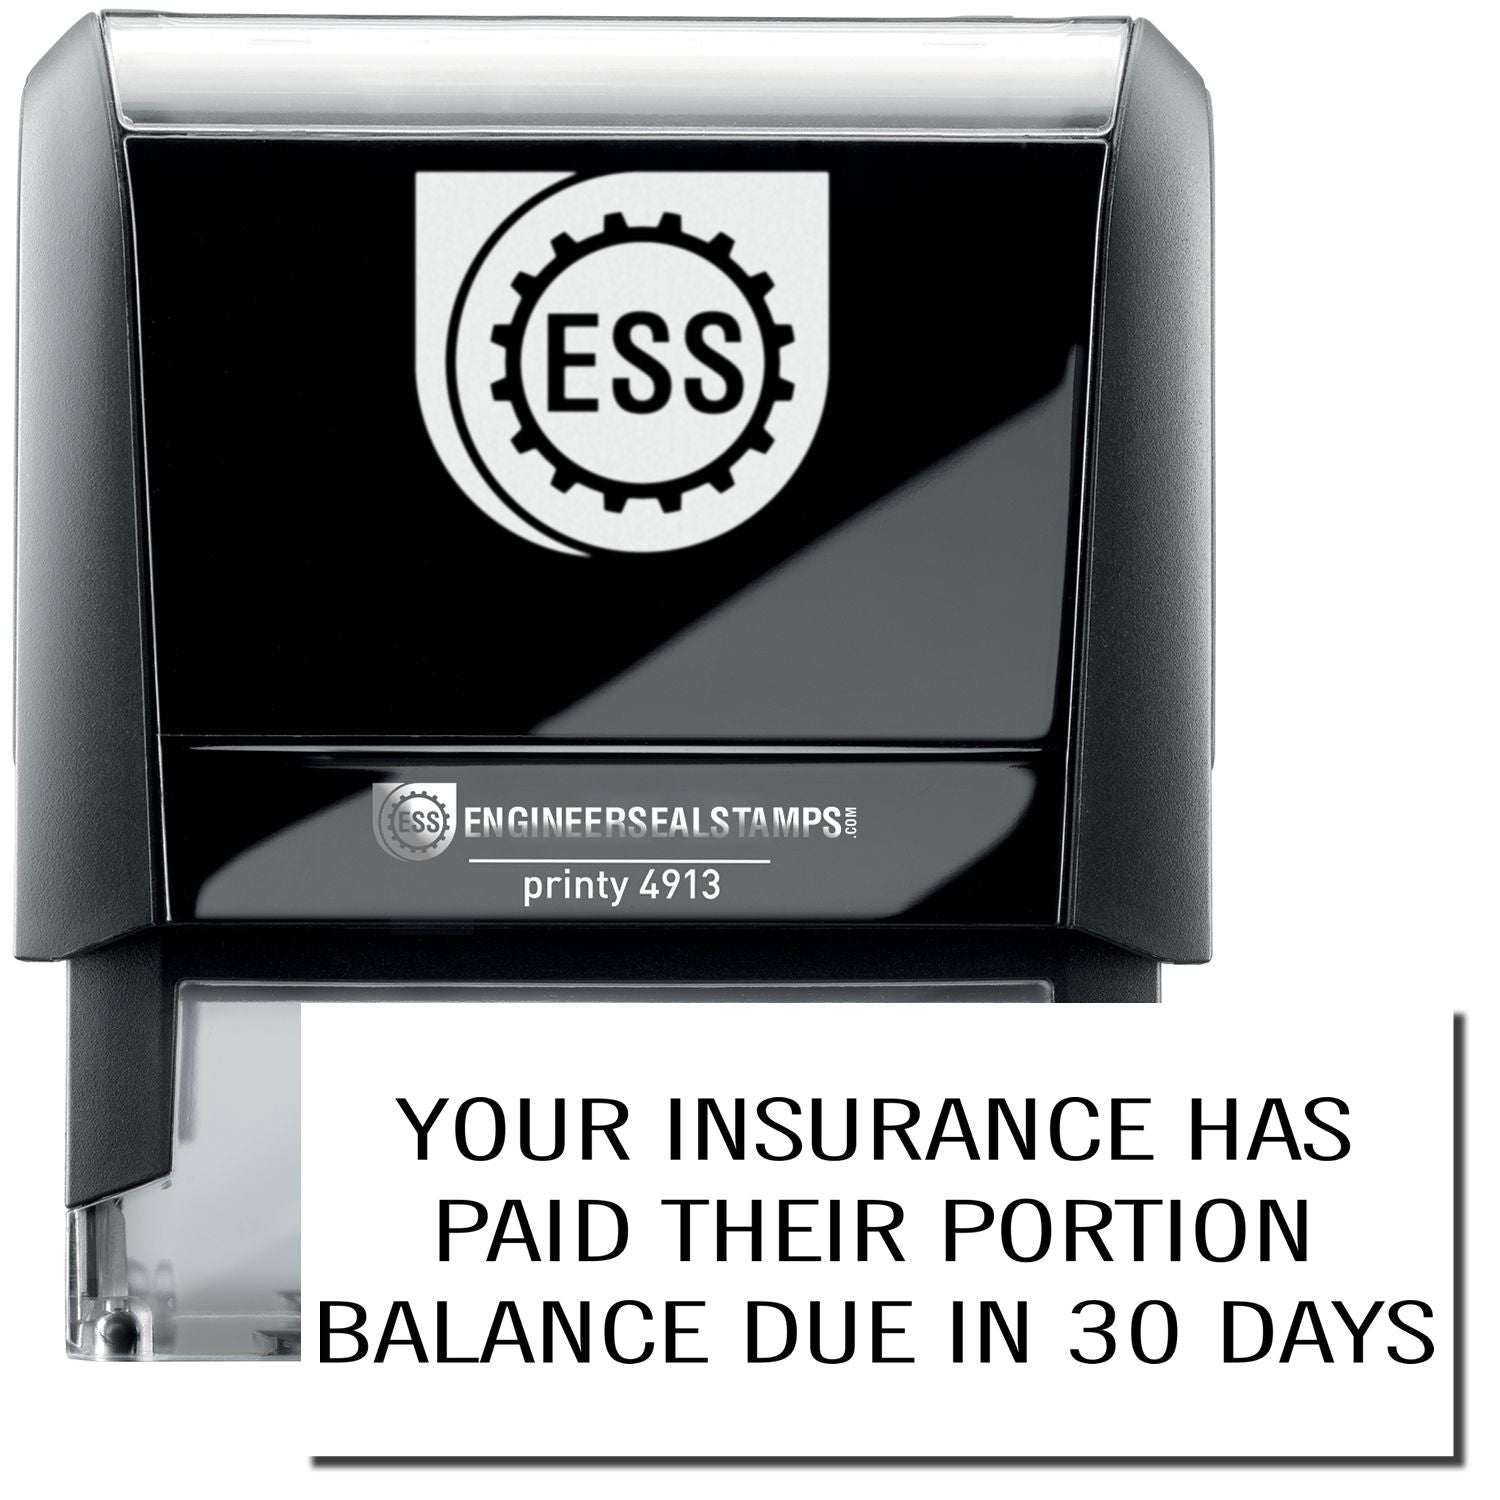 A self-inking stamp with a stamped image showing how the text "YOUR INSURANCE HAS PAID THEIR PORTION BALANCE DUE IN 30 DAYS" in a large font is displayed by it after stamping.